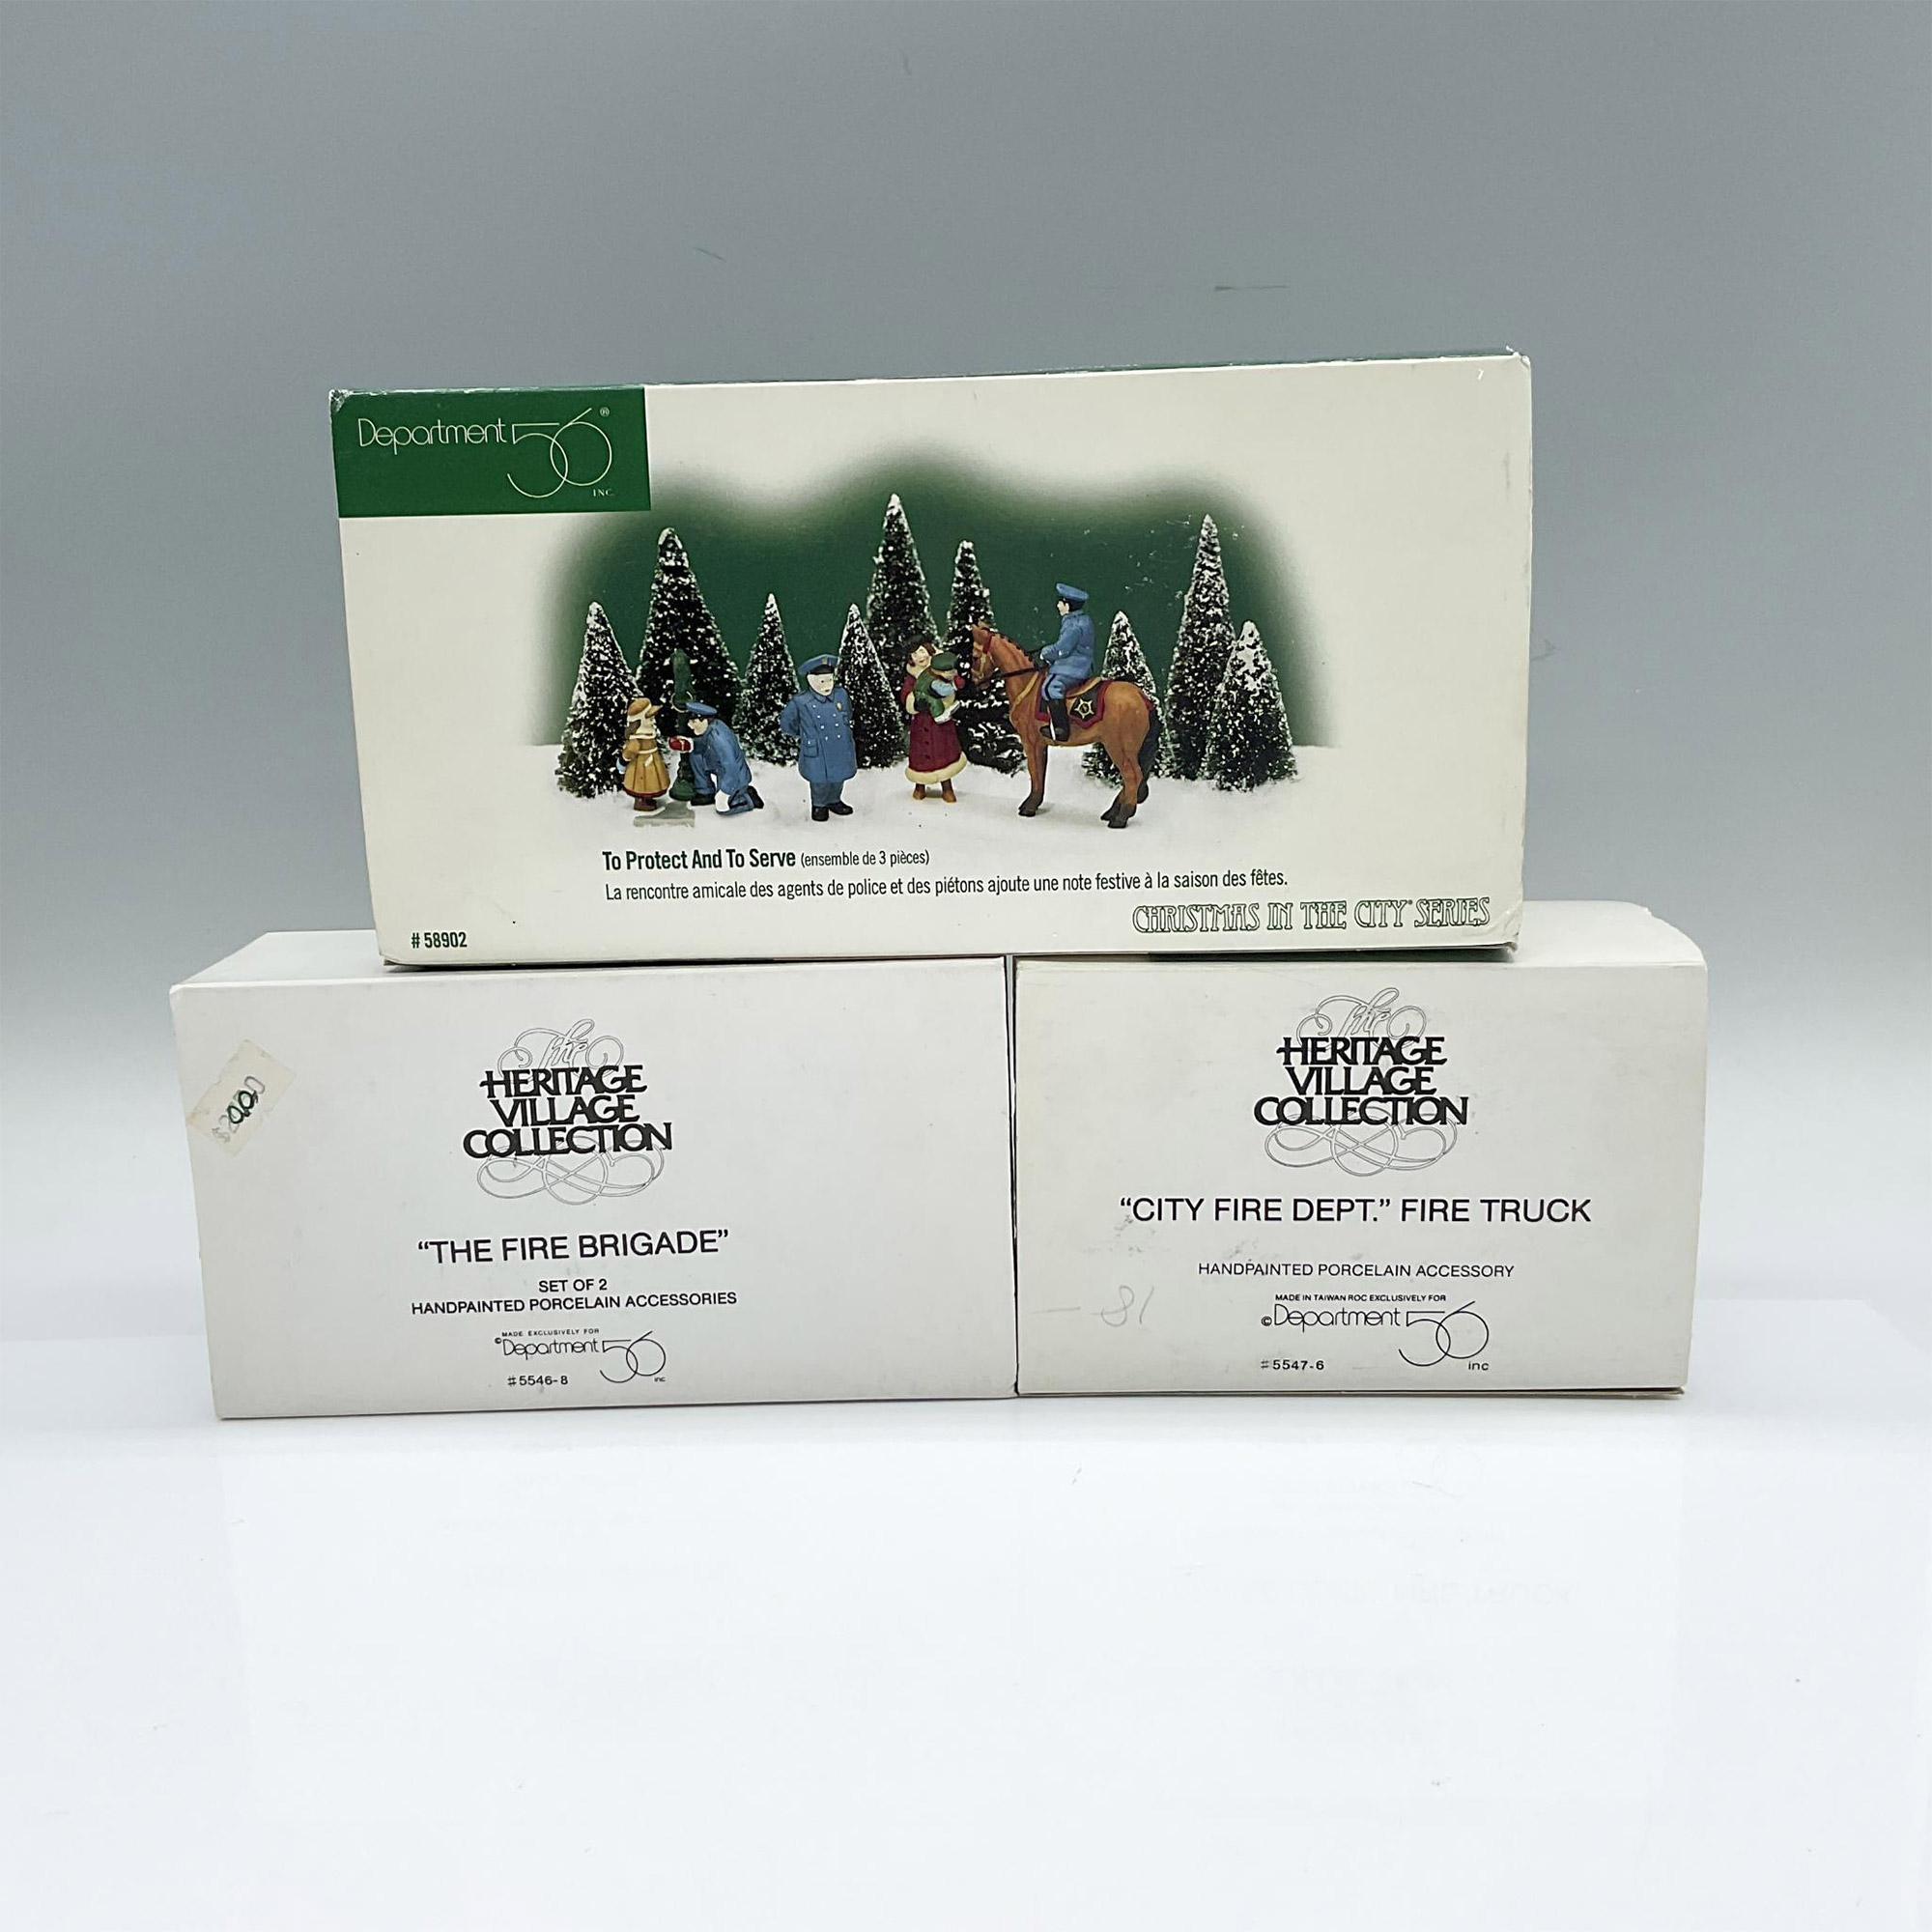 3pc Department 56 Heritage Village Collection Figurines - Image 4 of 4